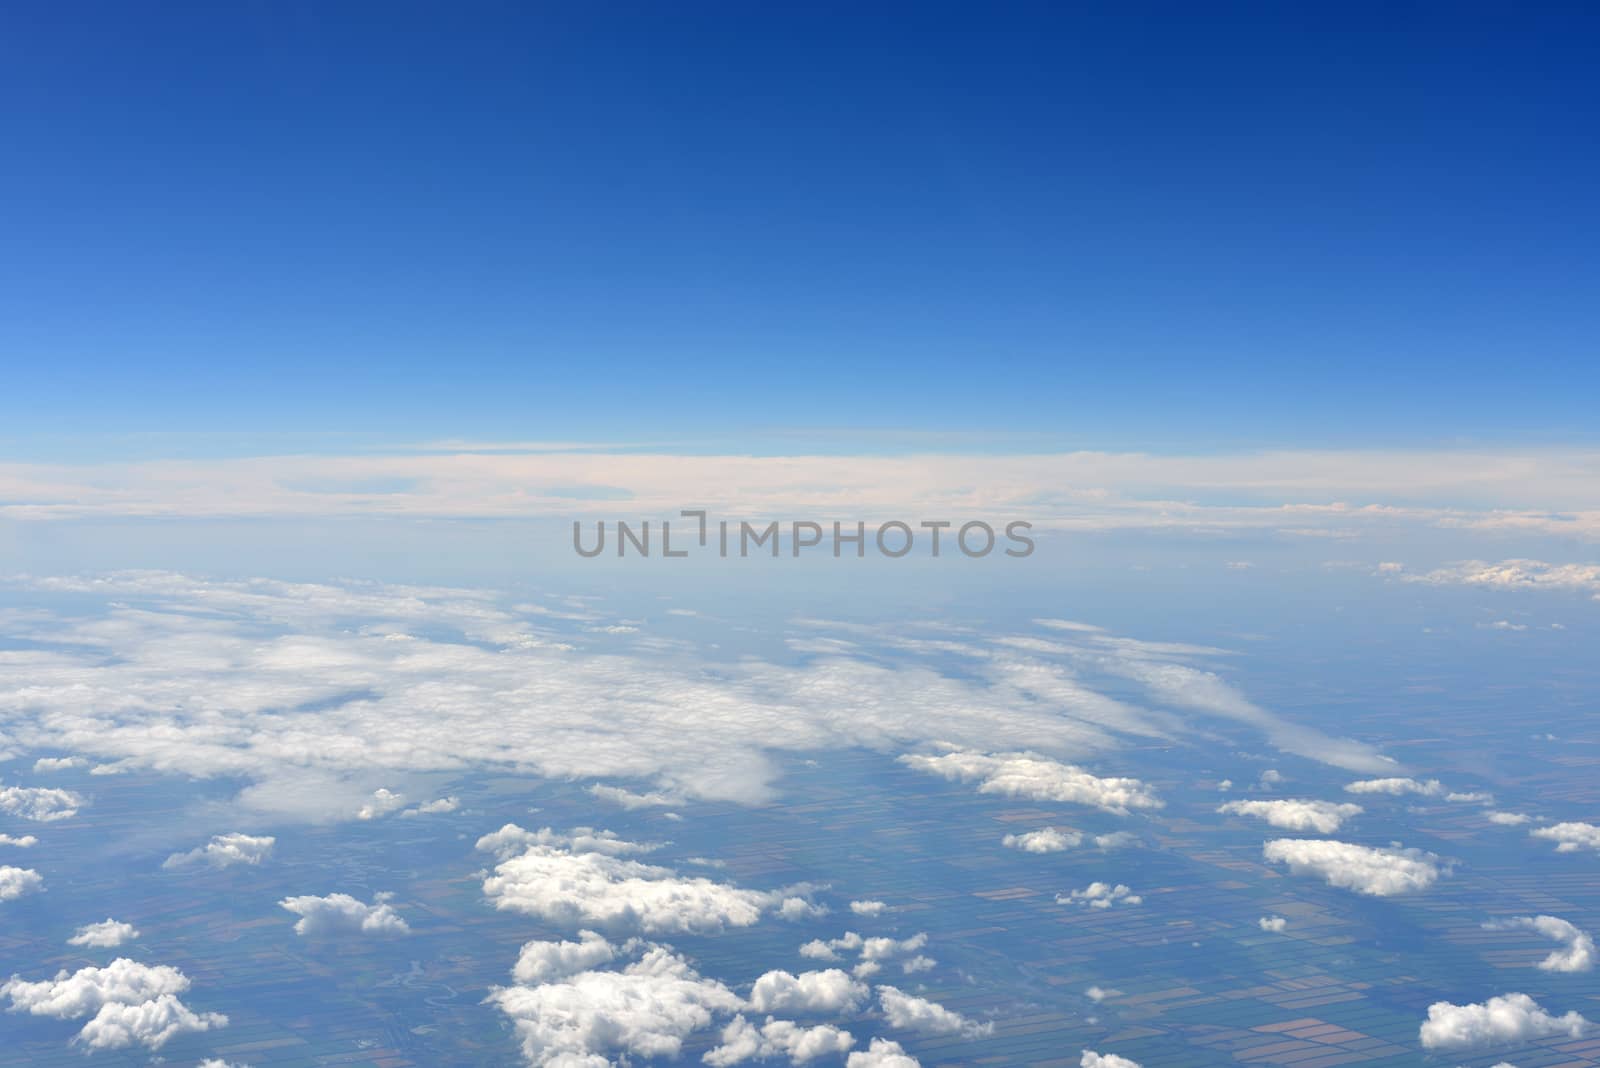 Earth's surface and clouds. Top view of aircraft